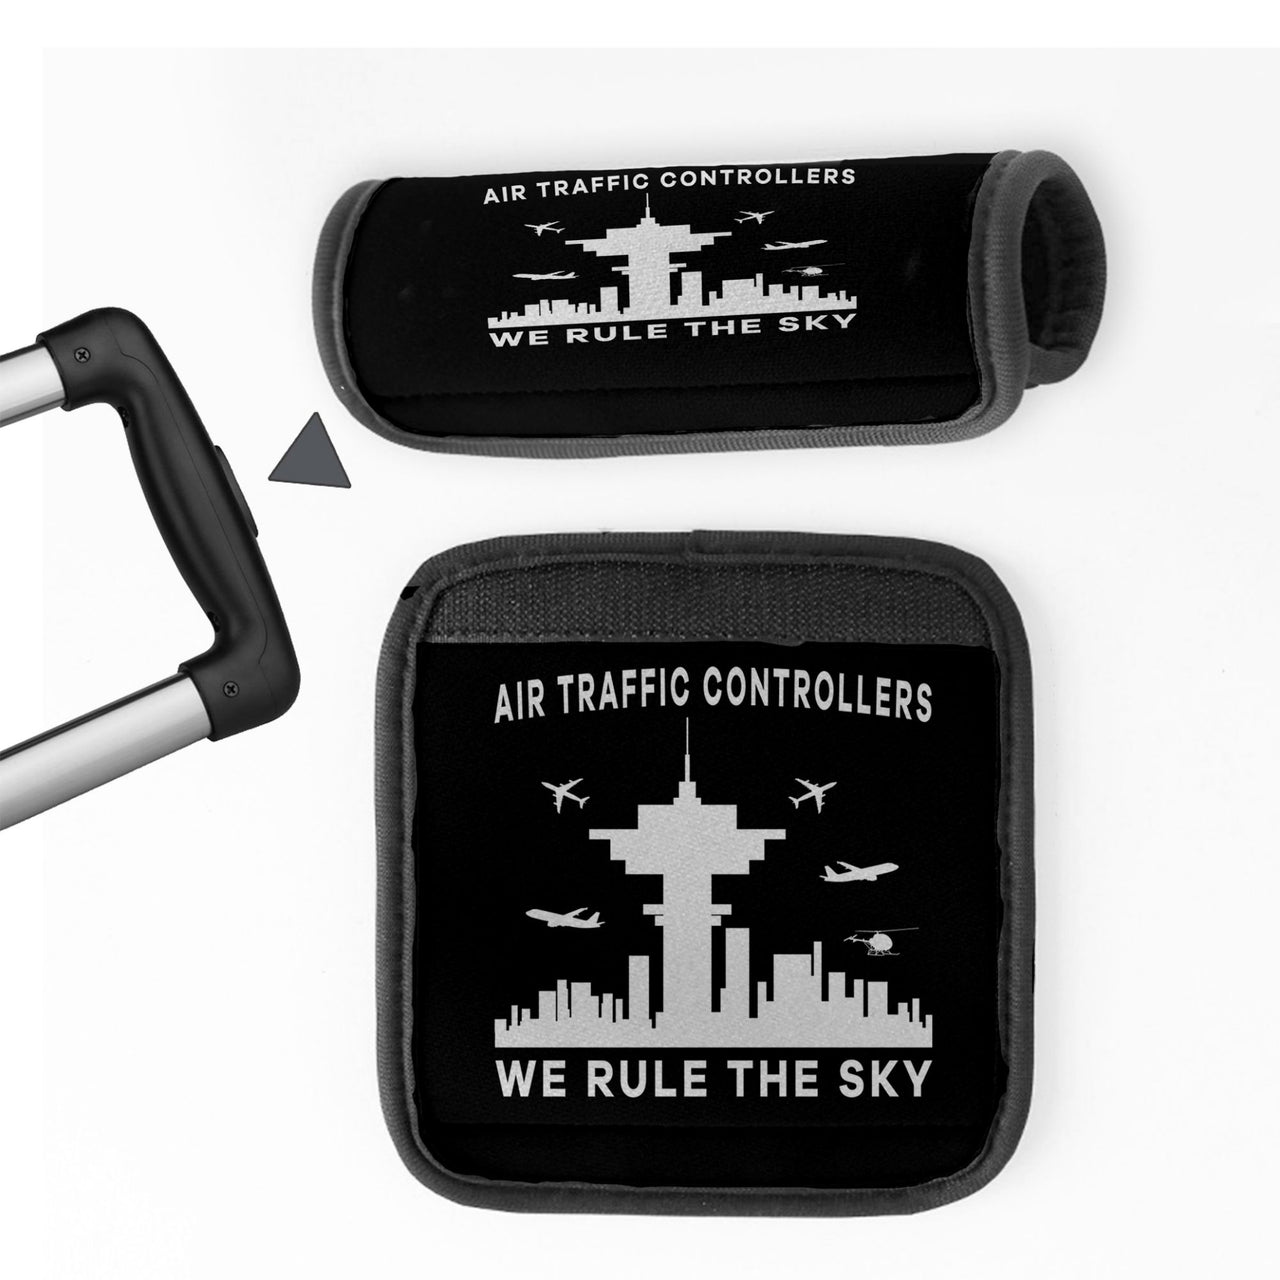 Air Traffic Controllers - We Rule The Sky Designed Neoprene Luggage Handle Covers